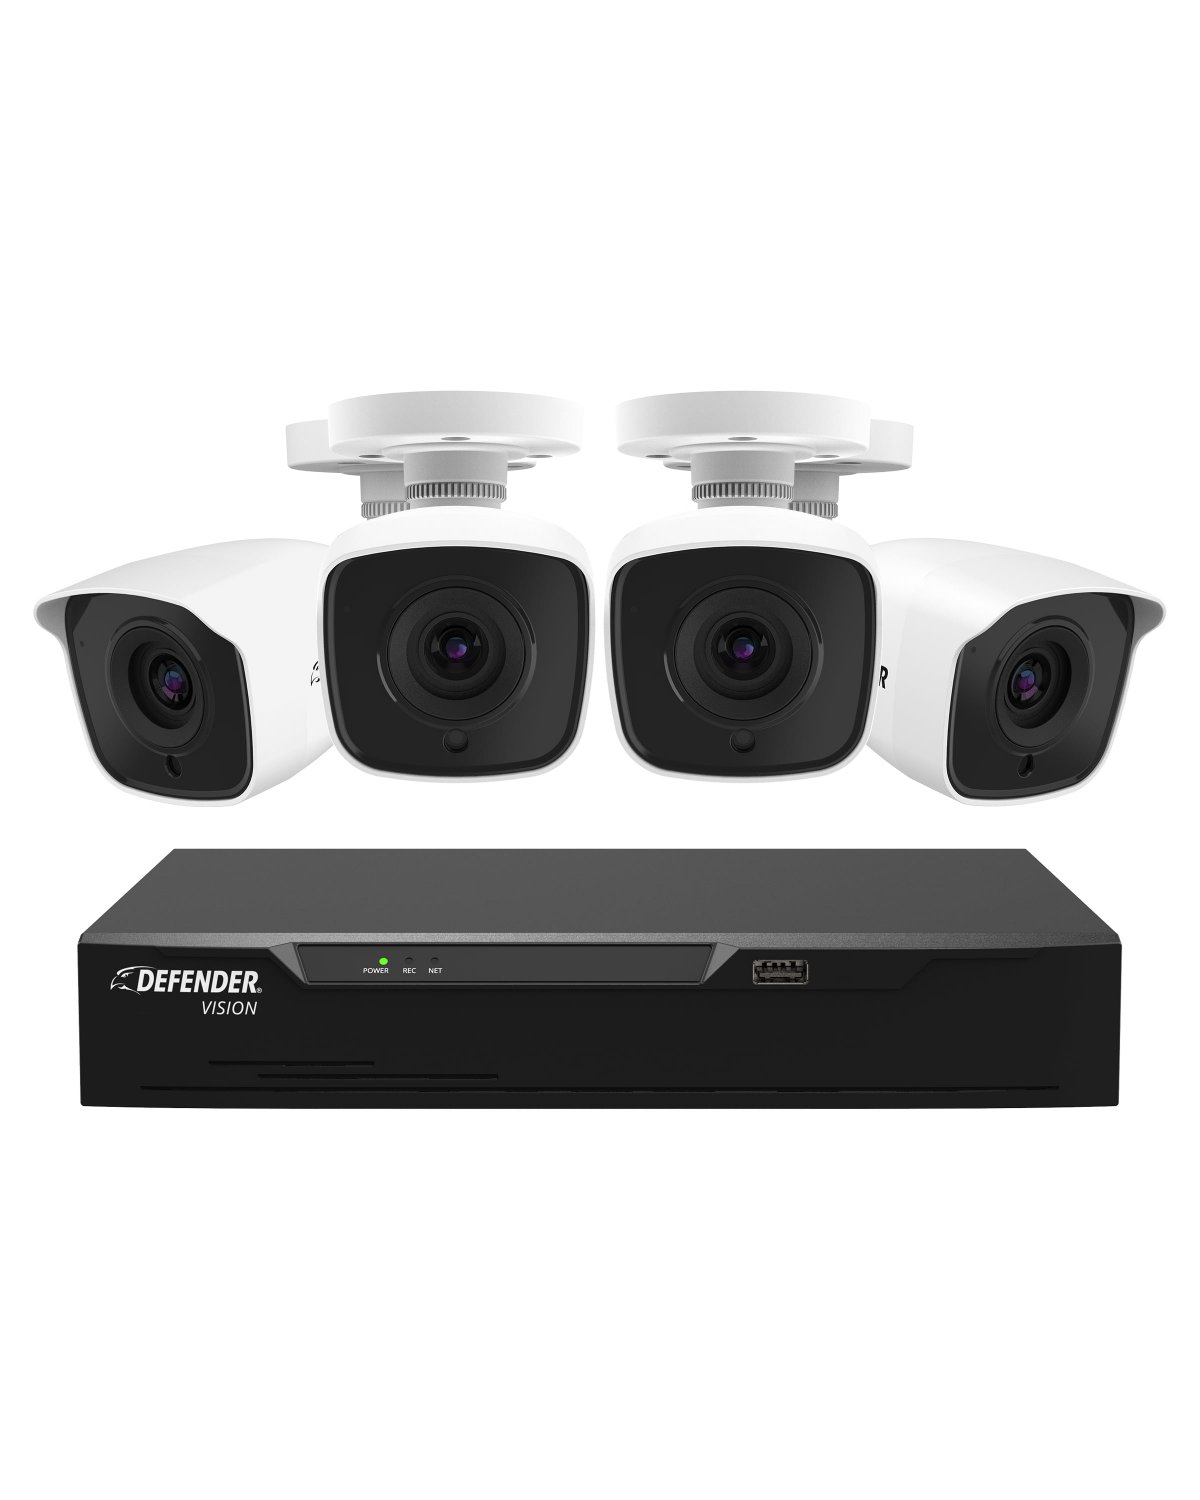 Defender 4k Wired Security Camera System, Night Vision, Mobile Viewing, Motion Detection (4 Cameras)